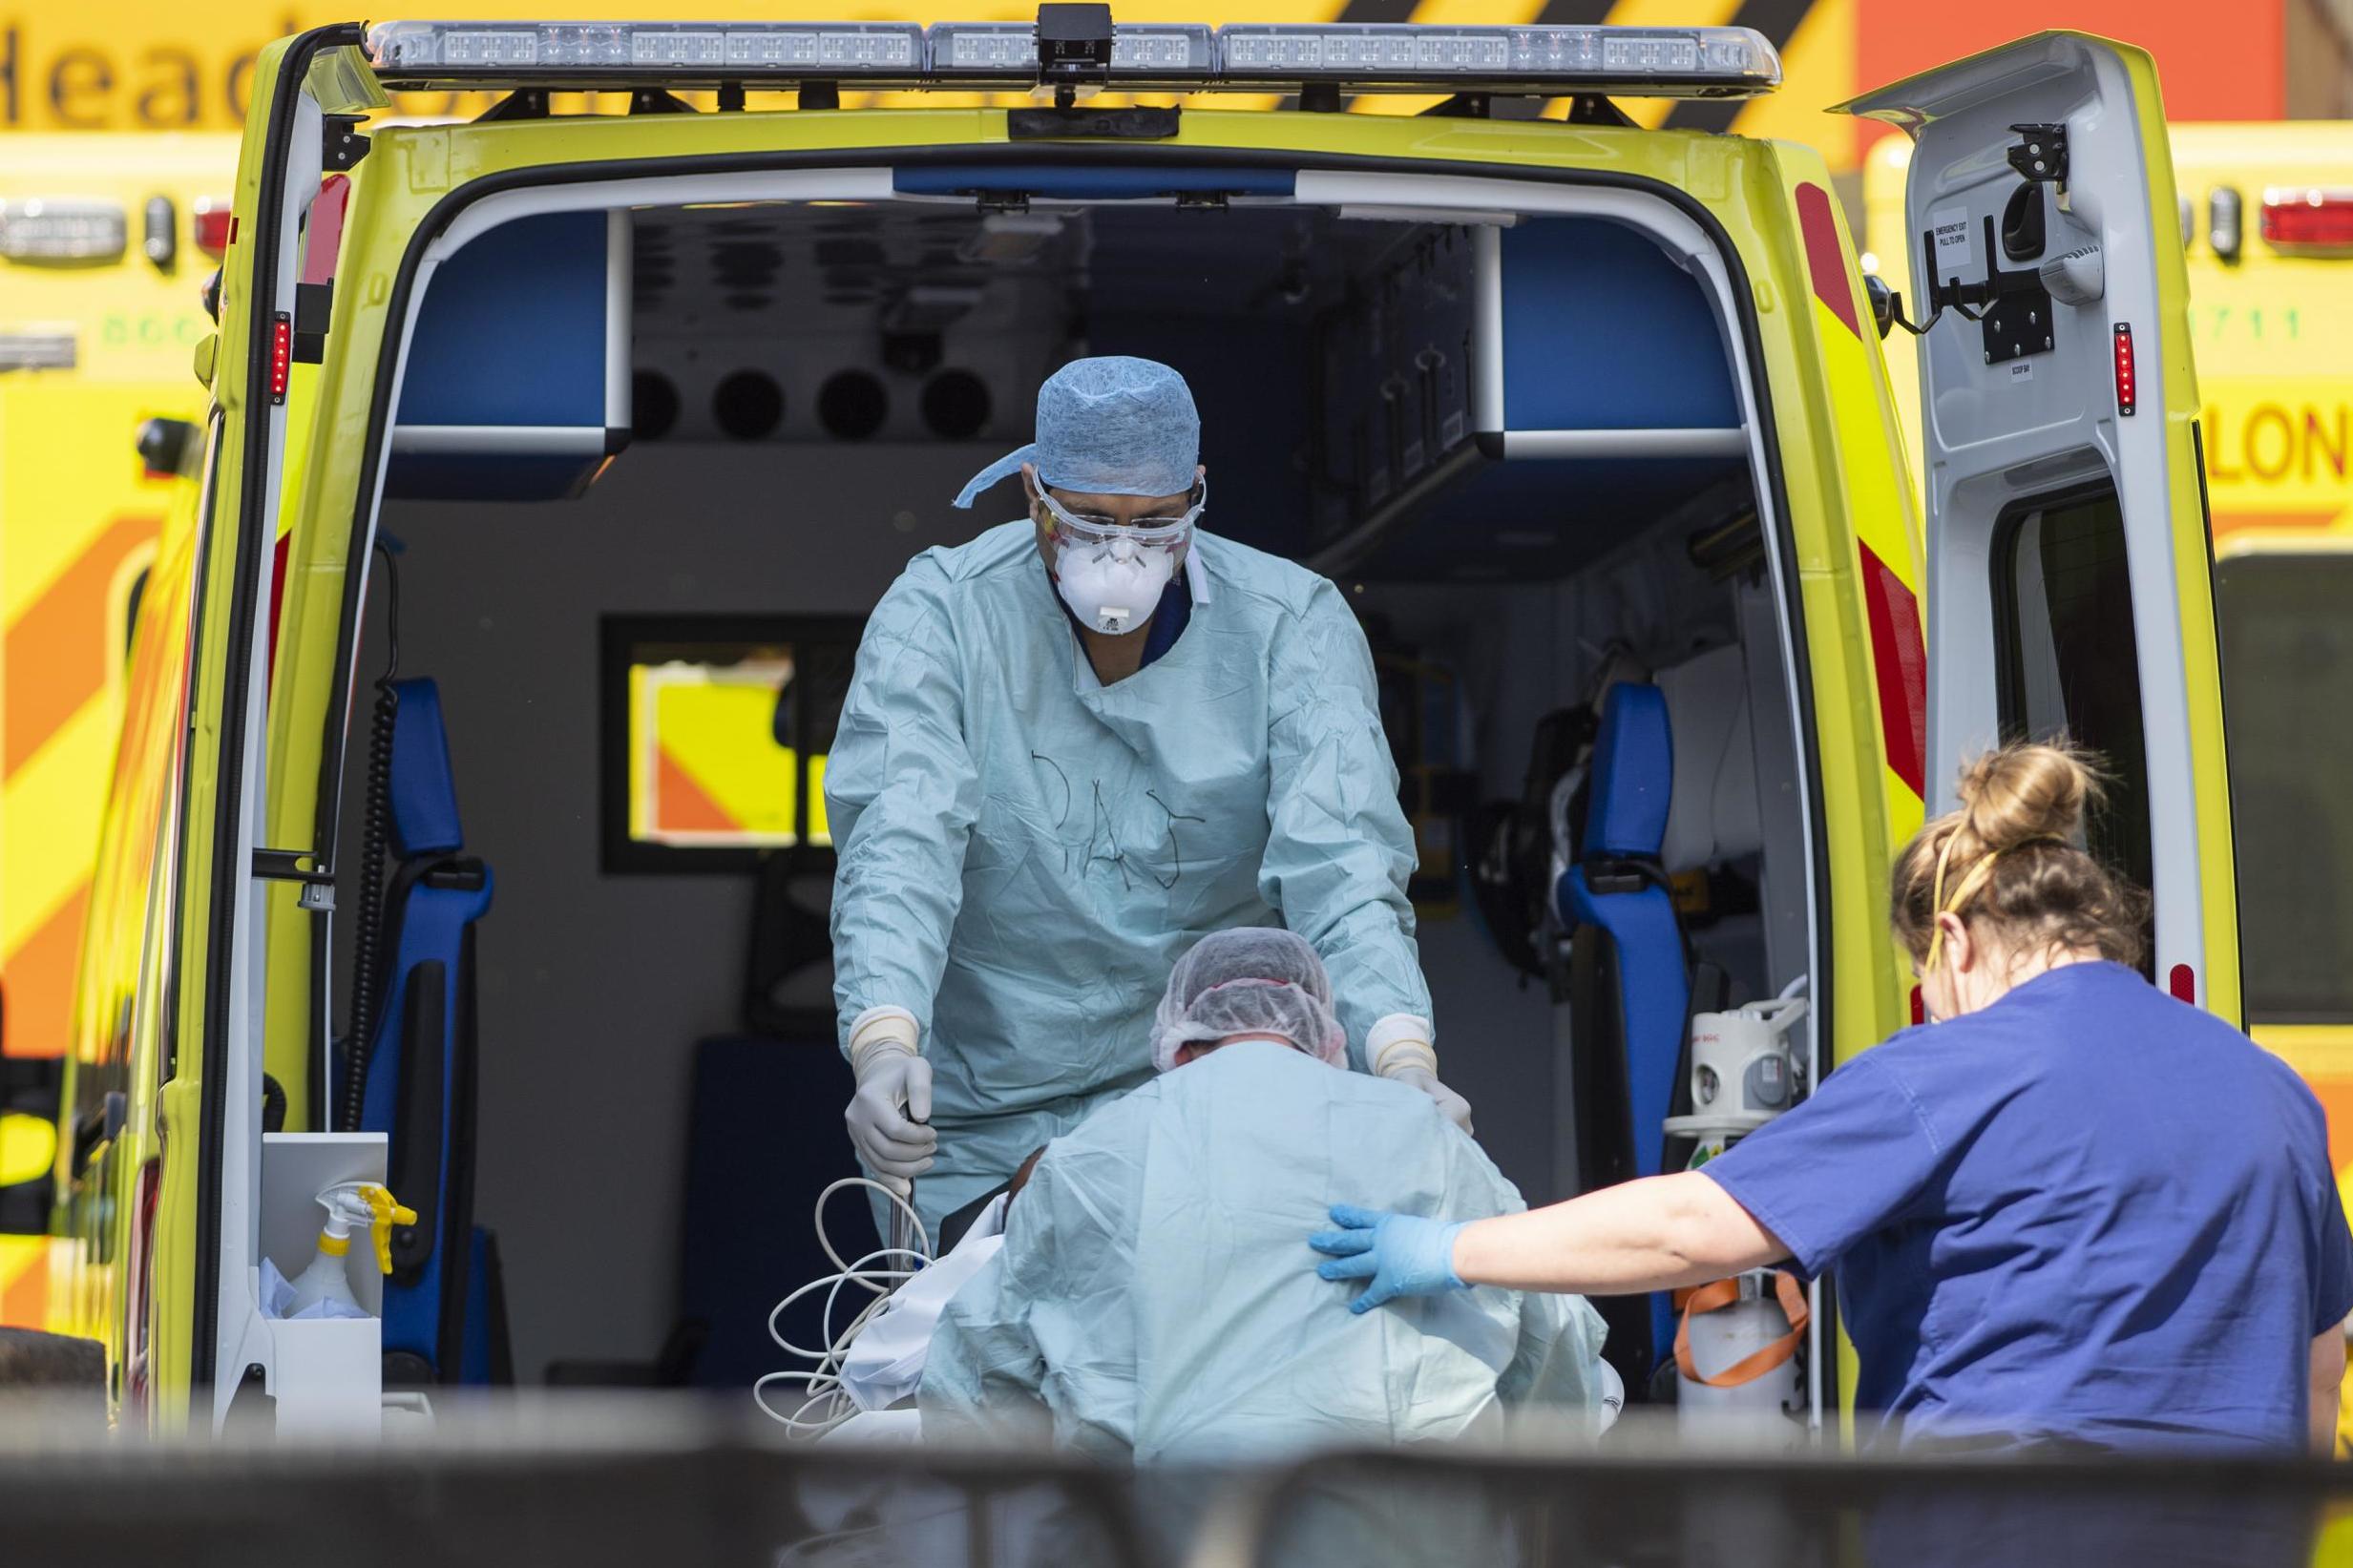 Hospitals and ambulances are reporting record levels